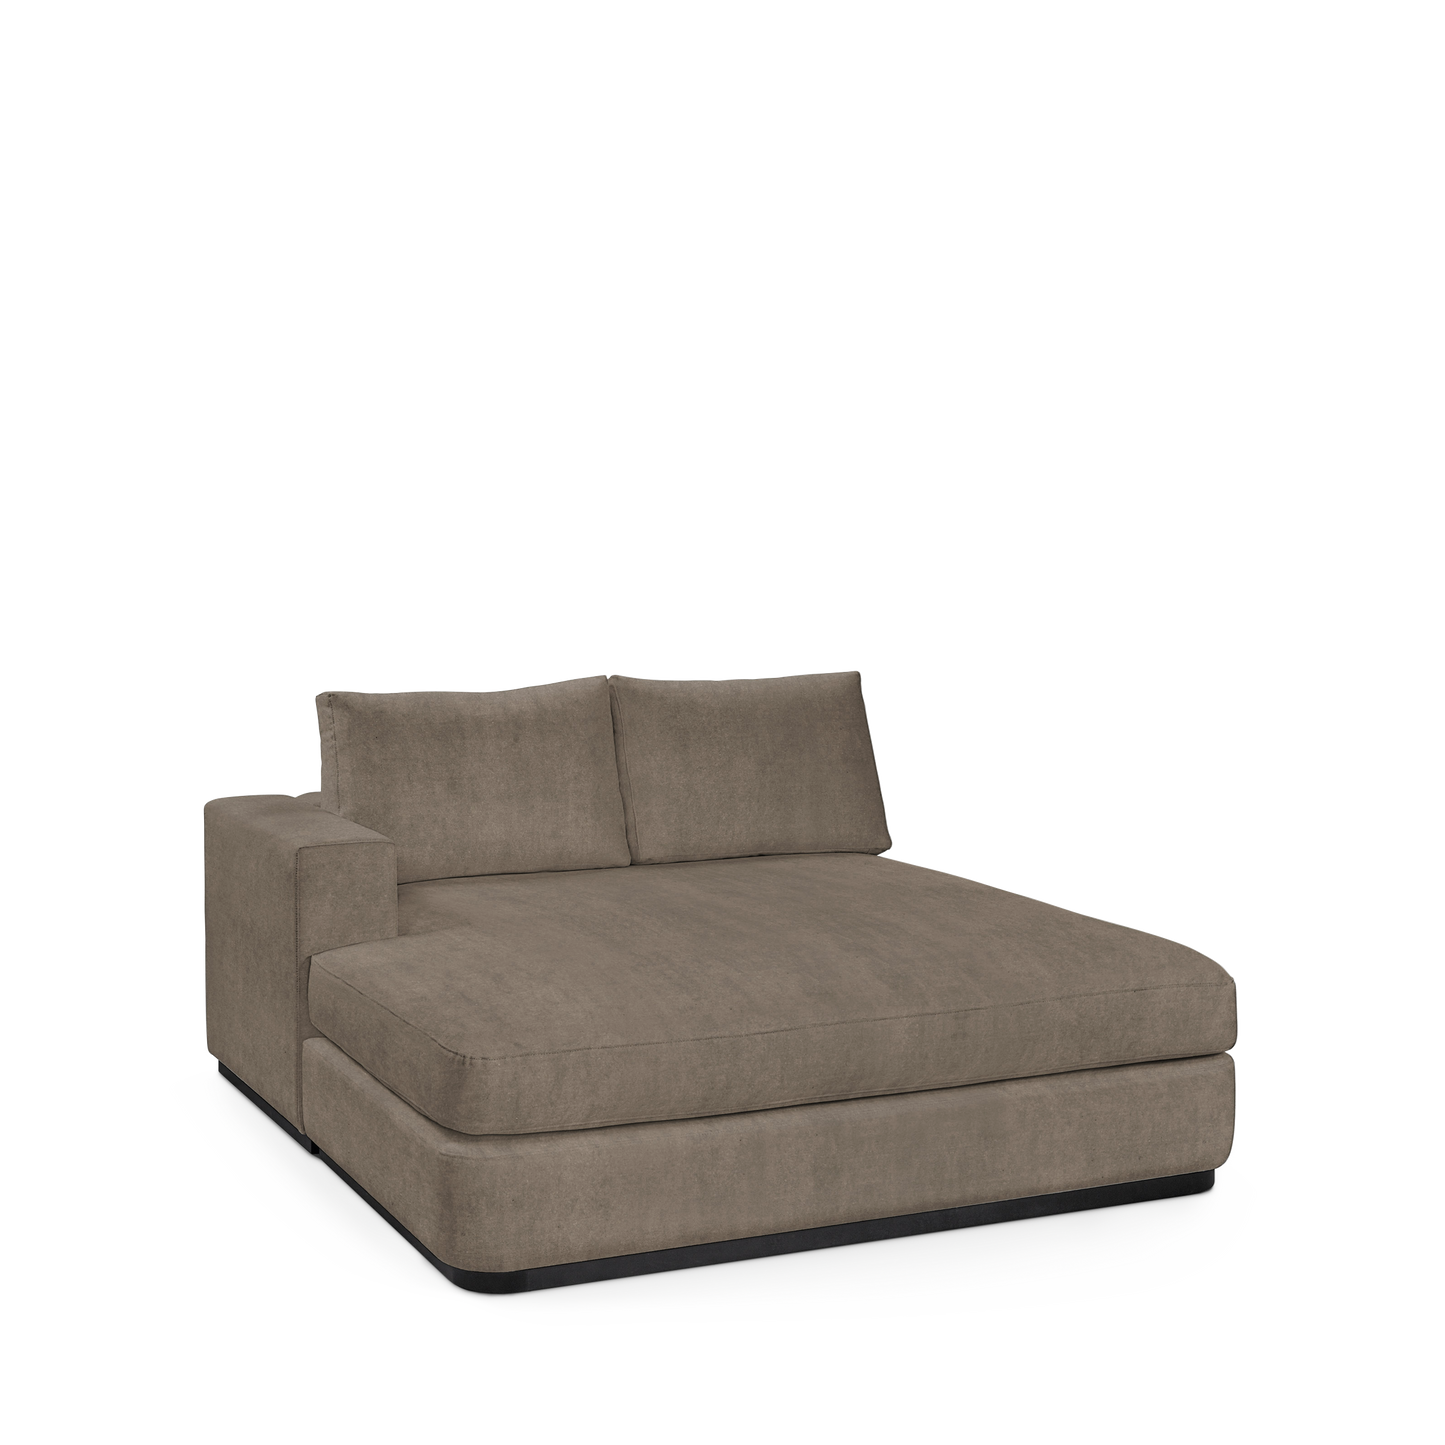 ATLAS 160 Lounge Bed arm rest left with suede grey textile